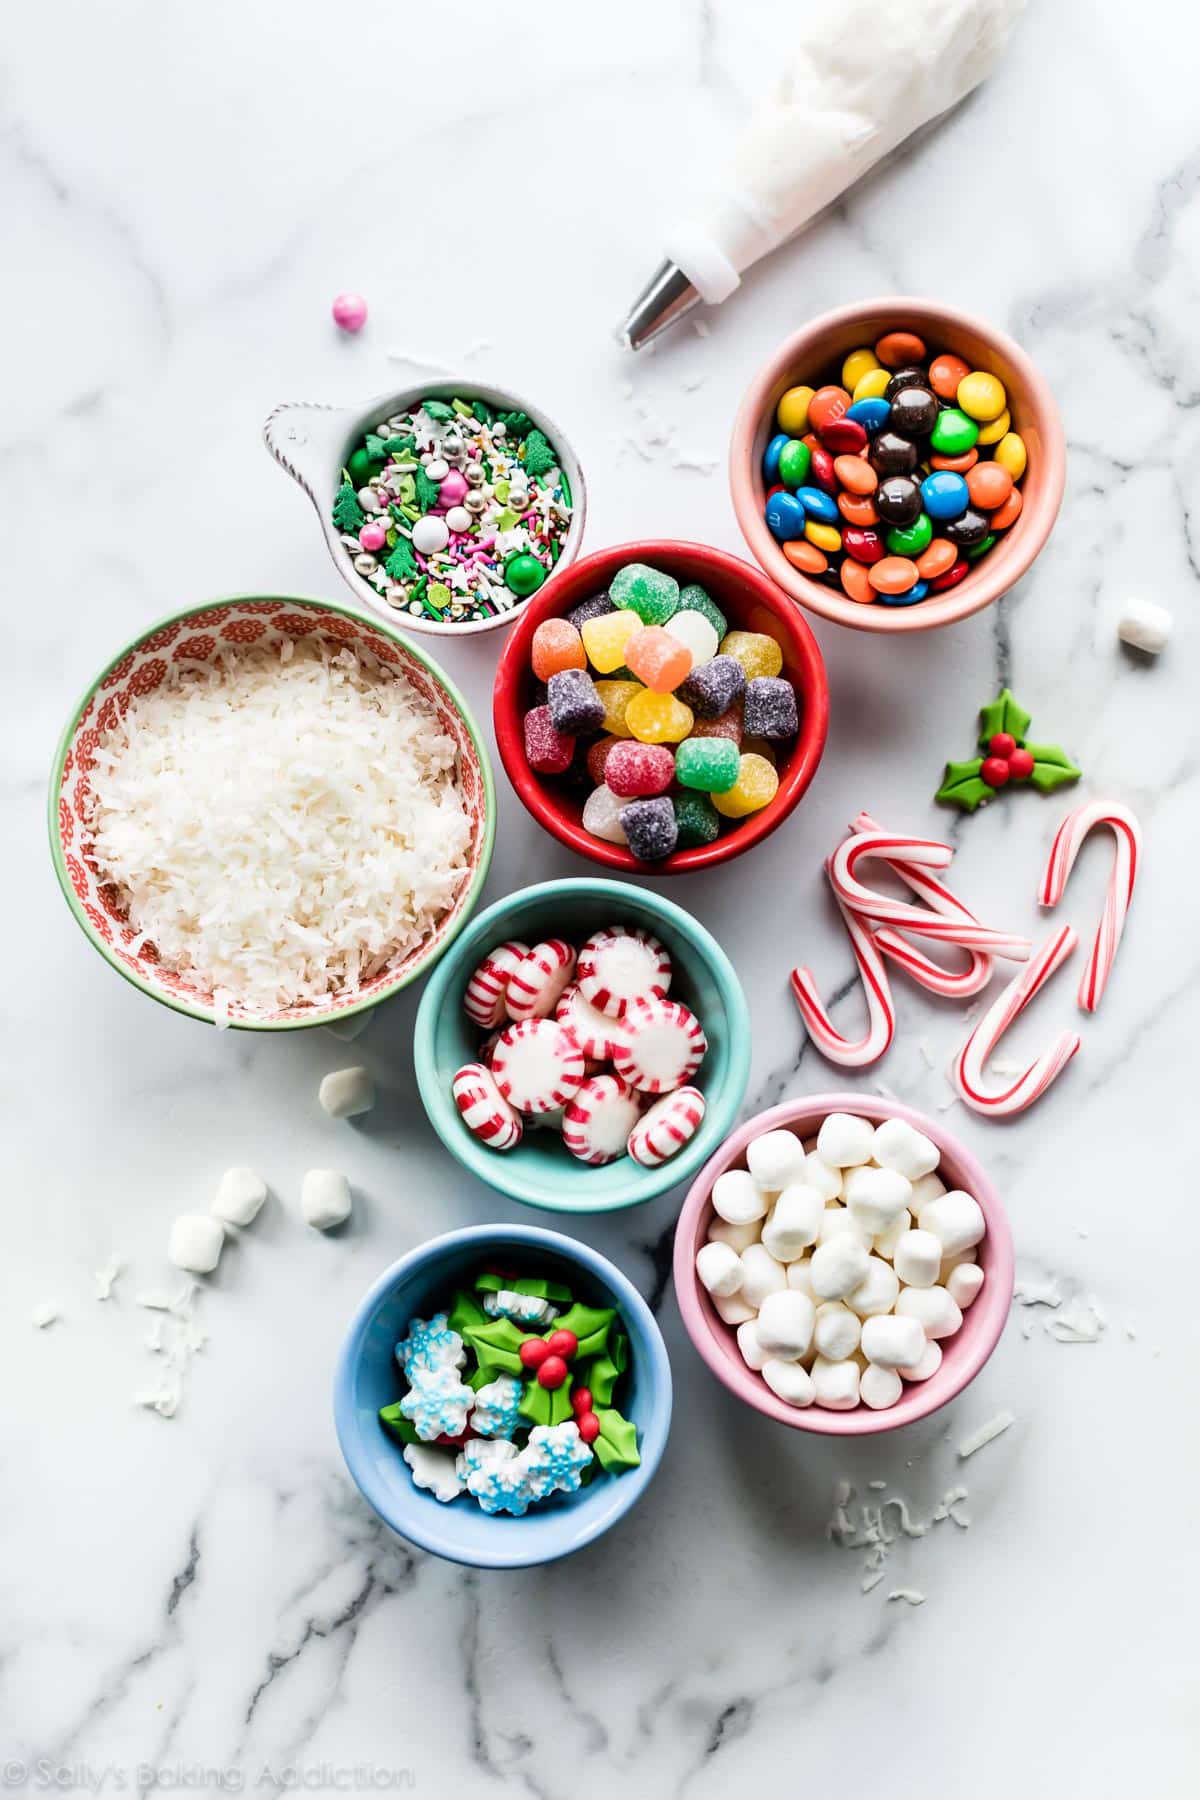 Colorful candy in bowls for decorating gingerbread house